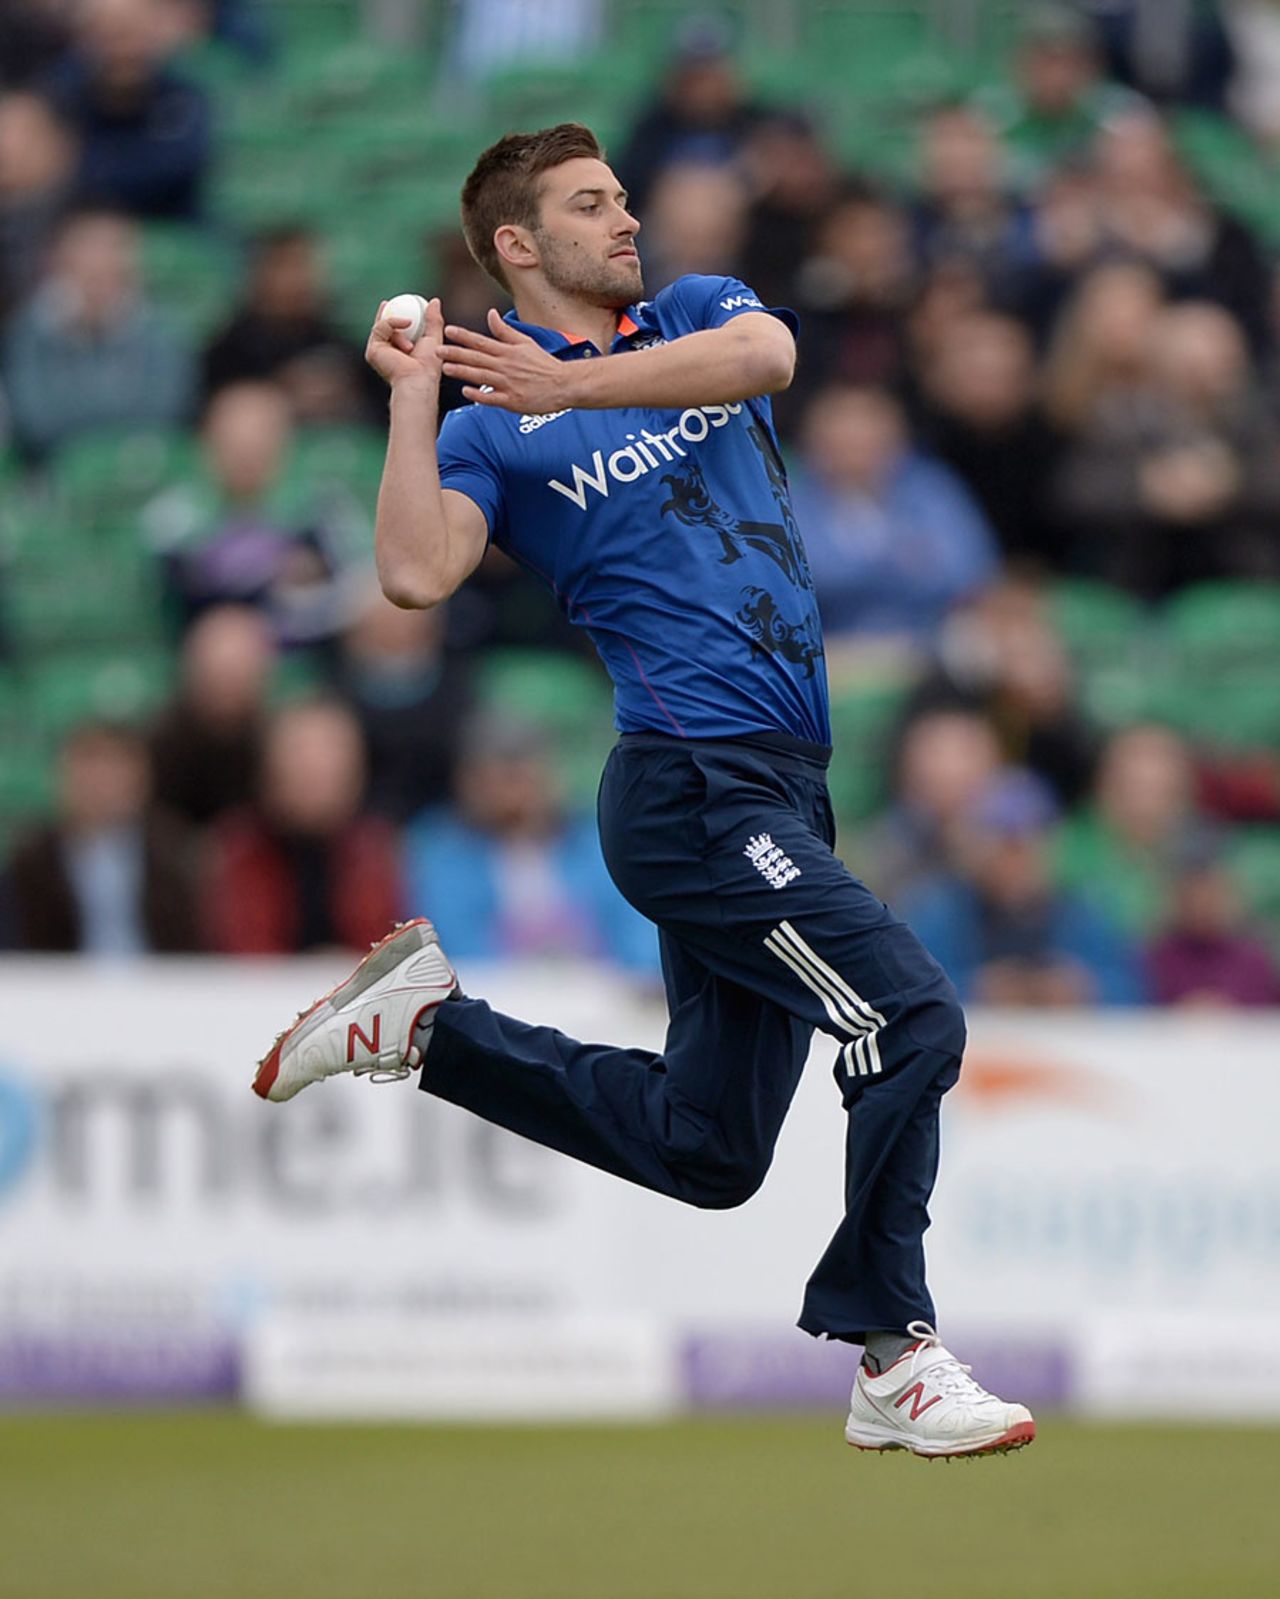 Mark Wood in action on debut, Ireland v England, only ODI, Malahide, May 8, 2015